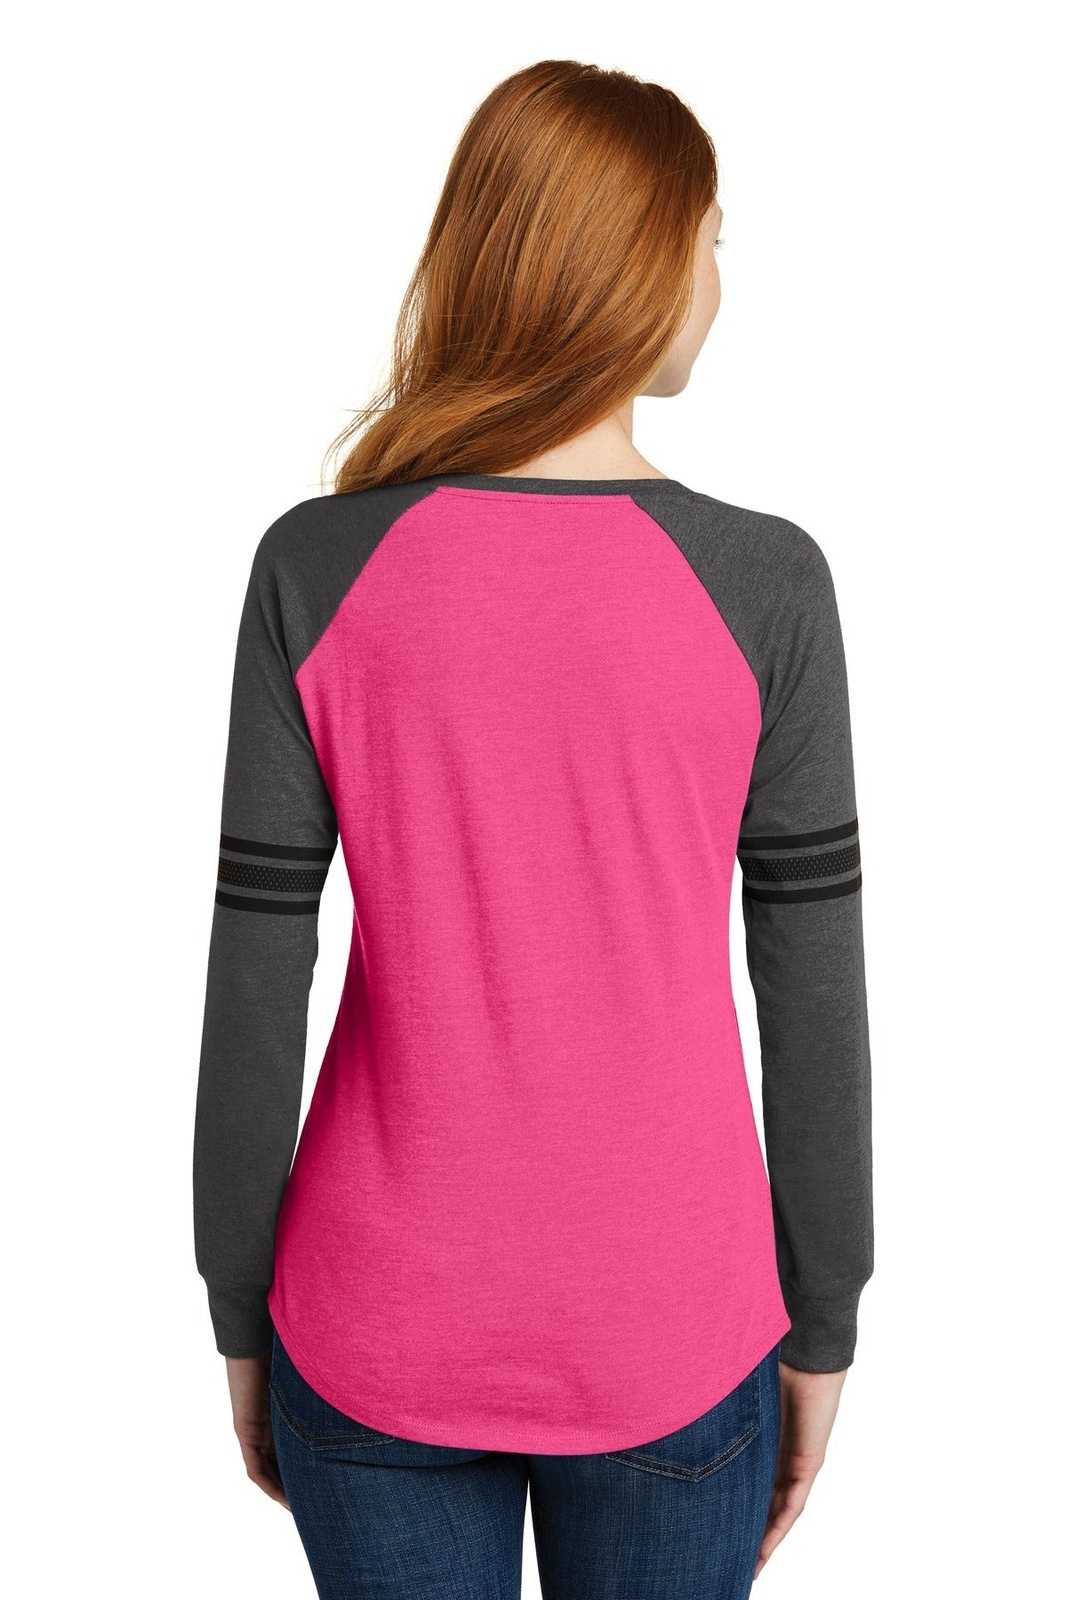 District DM477 Women's Game Long Sleeve V-Neck Tee - Heathered Dark Fuchsia Heathered Charcoal Black - HIT a Double - 1